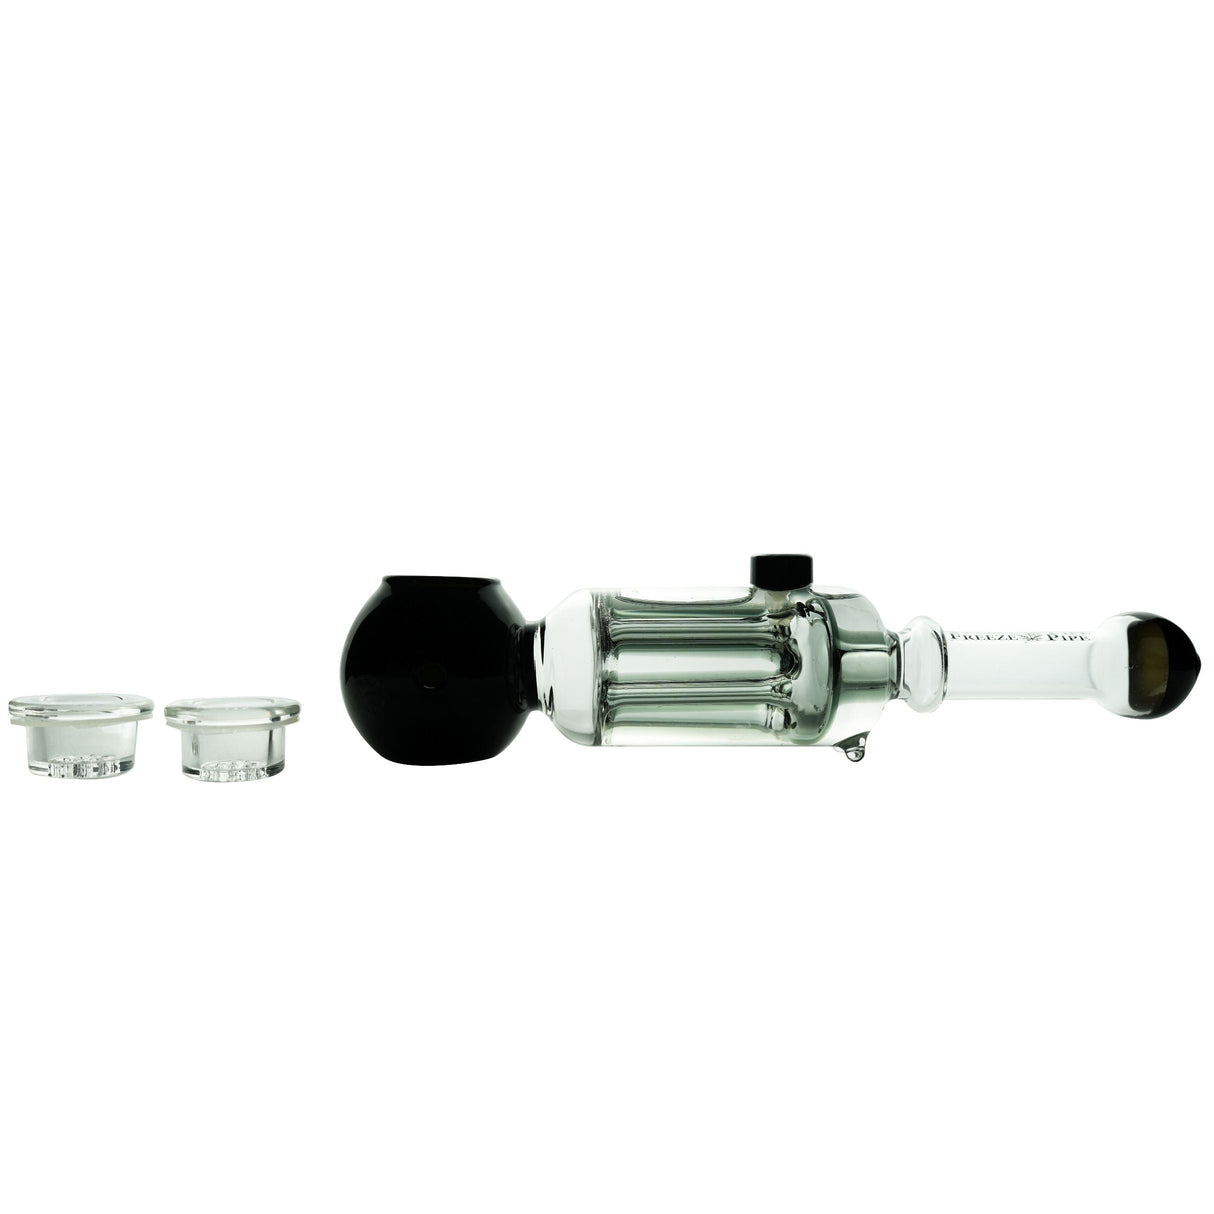 Freeze Pipe Revolver with 6 bowls side view on seamless white background